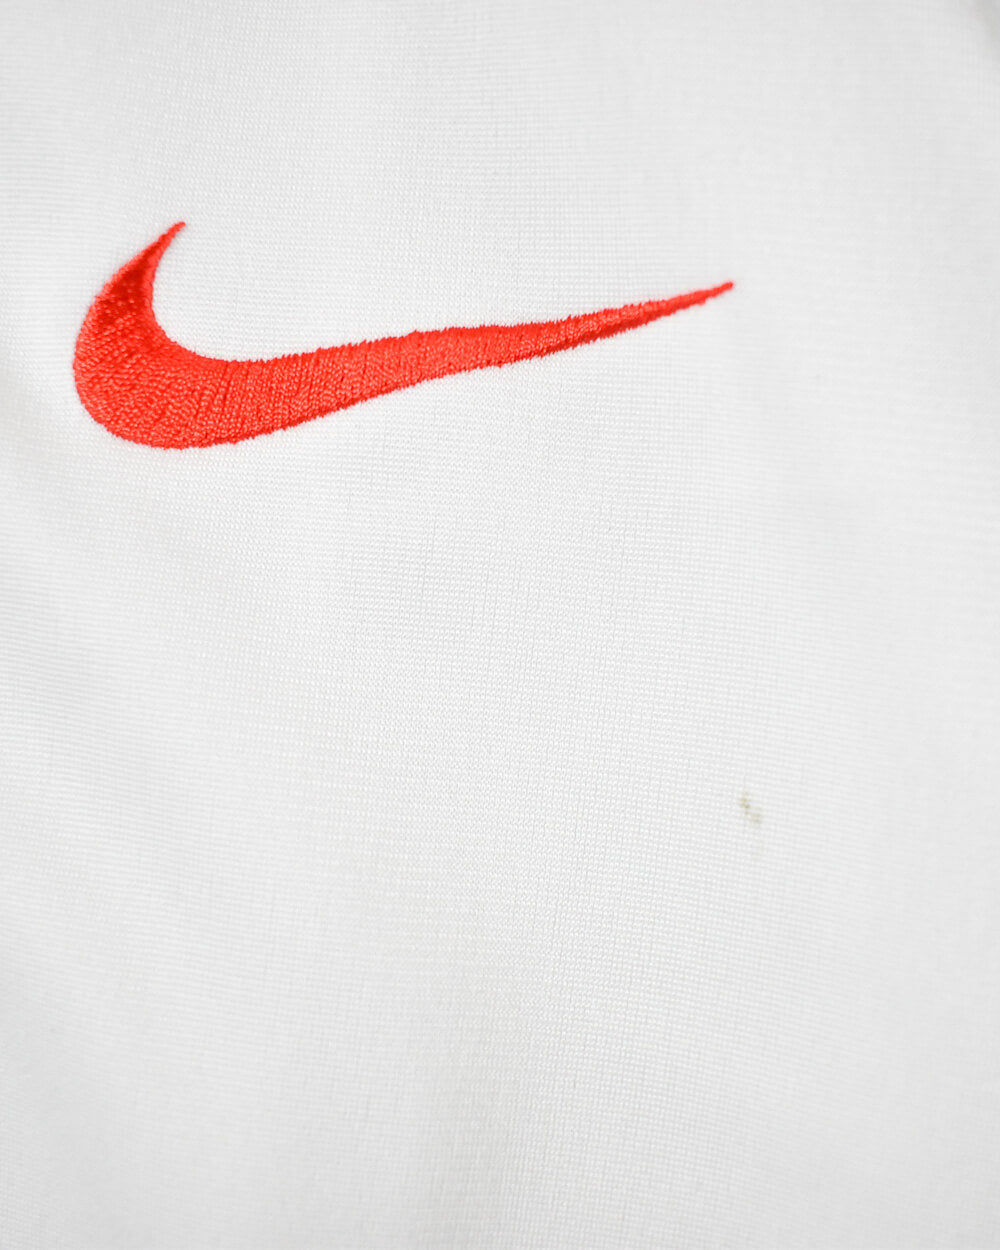 White Nike Tracksuit Top - Small